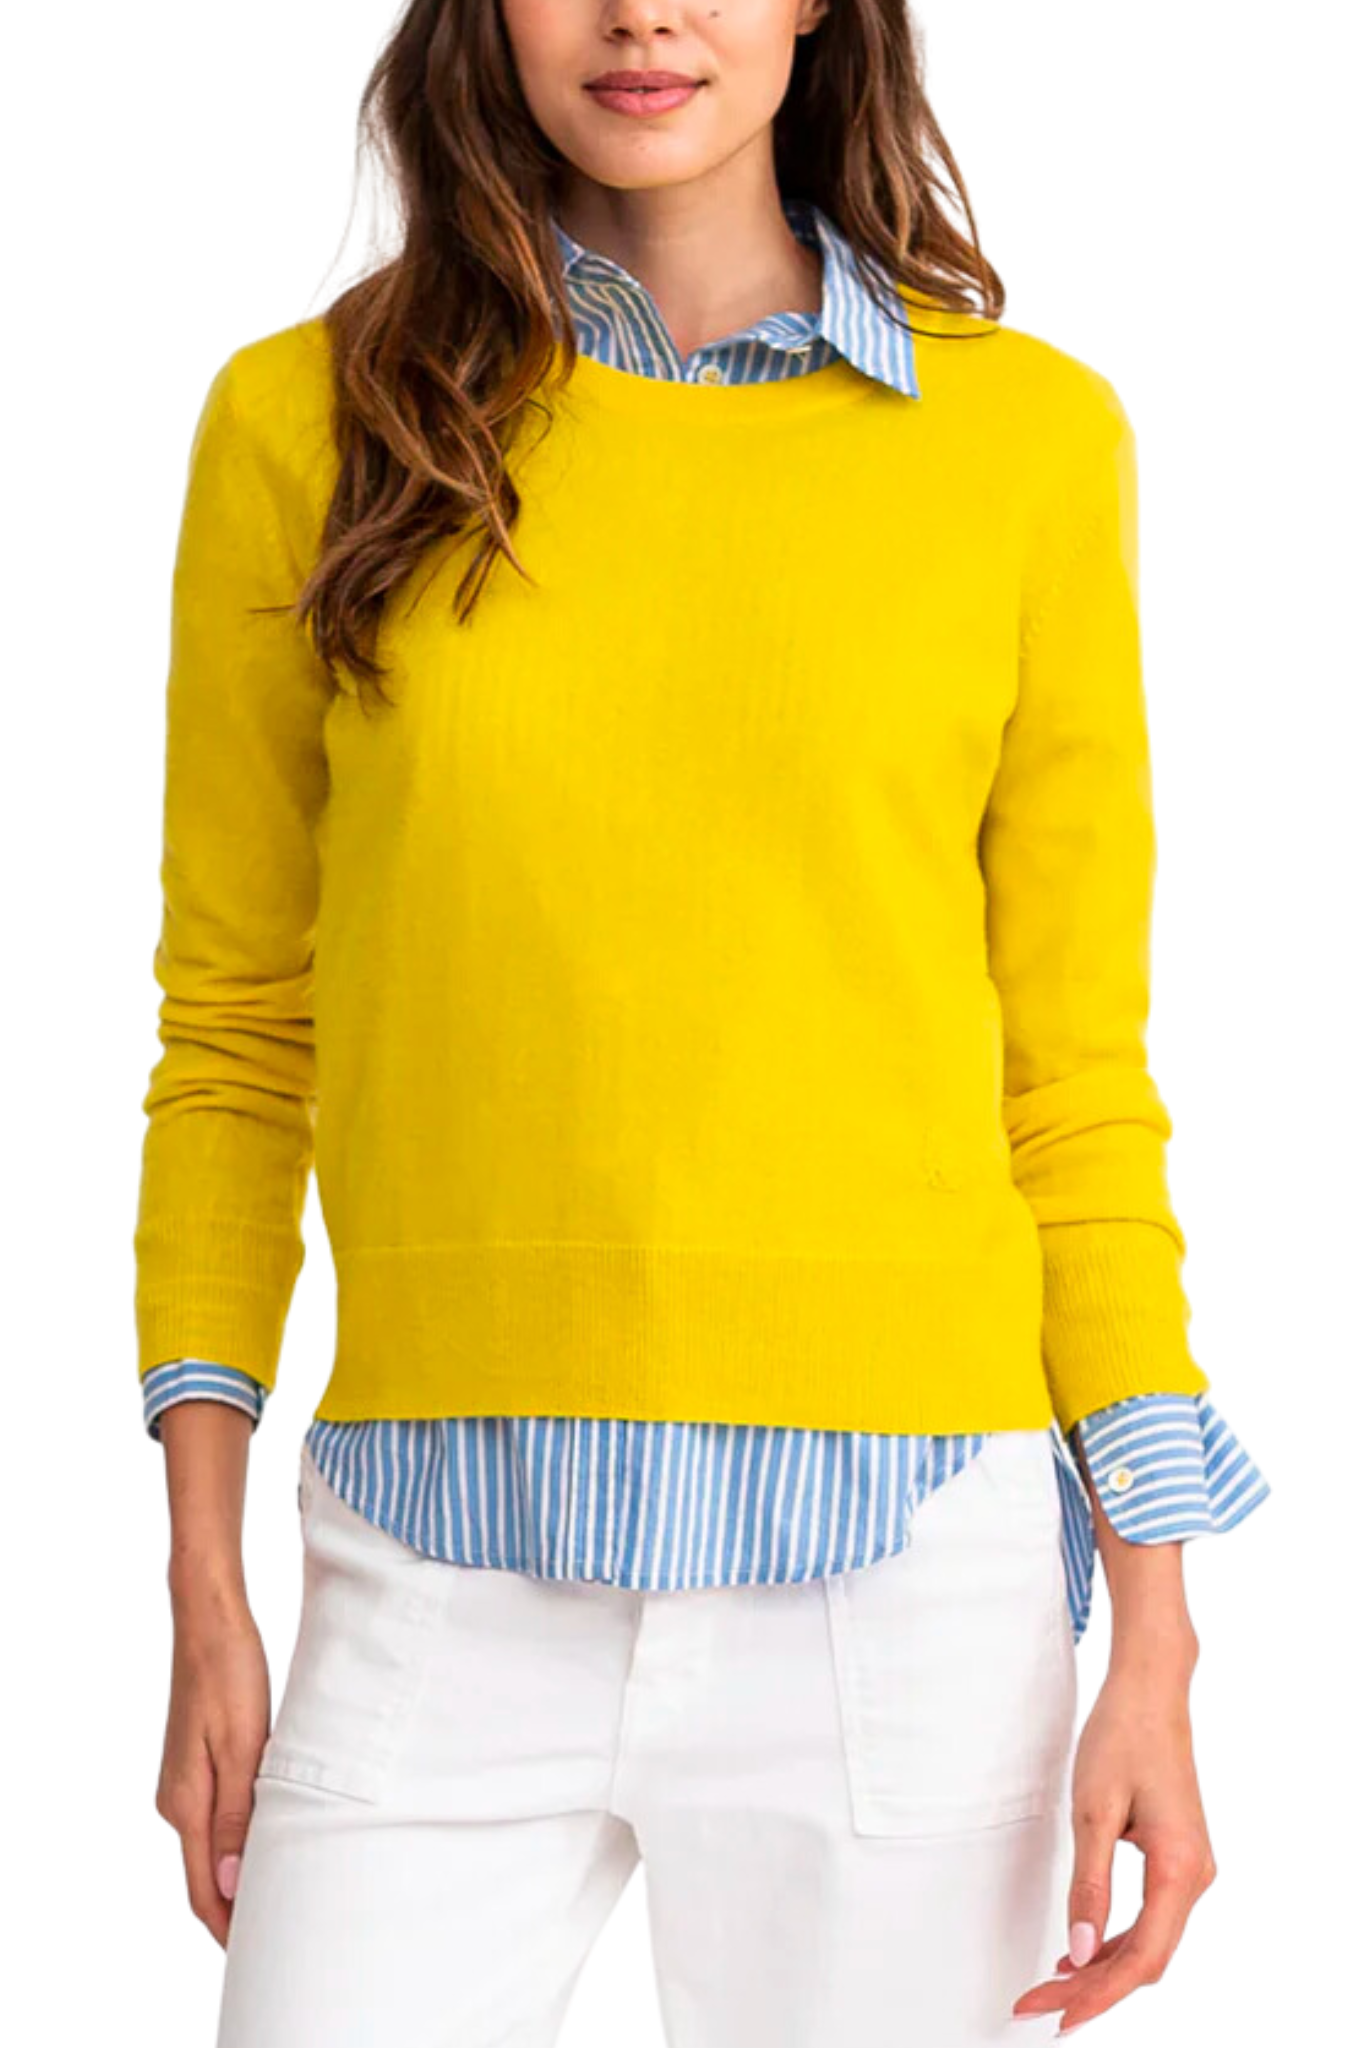 Kerri Rosenthal Cashmere Elbow-Patch Sweater